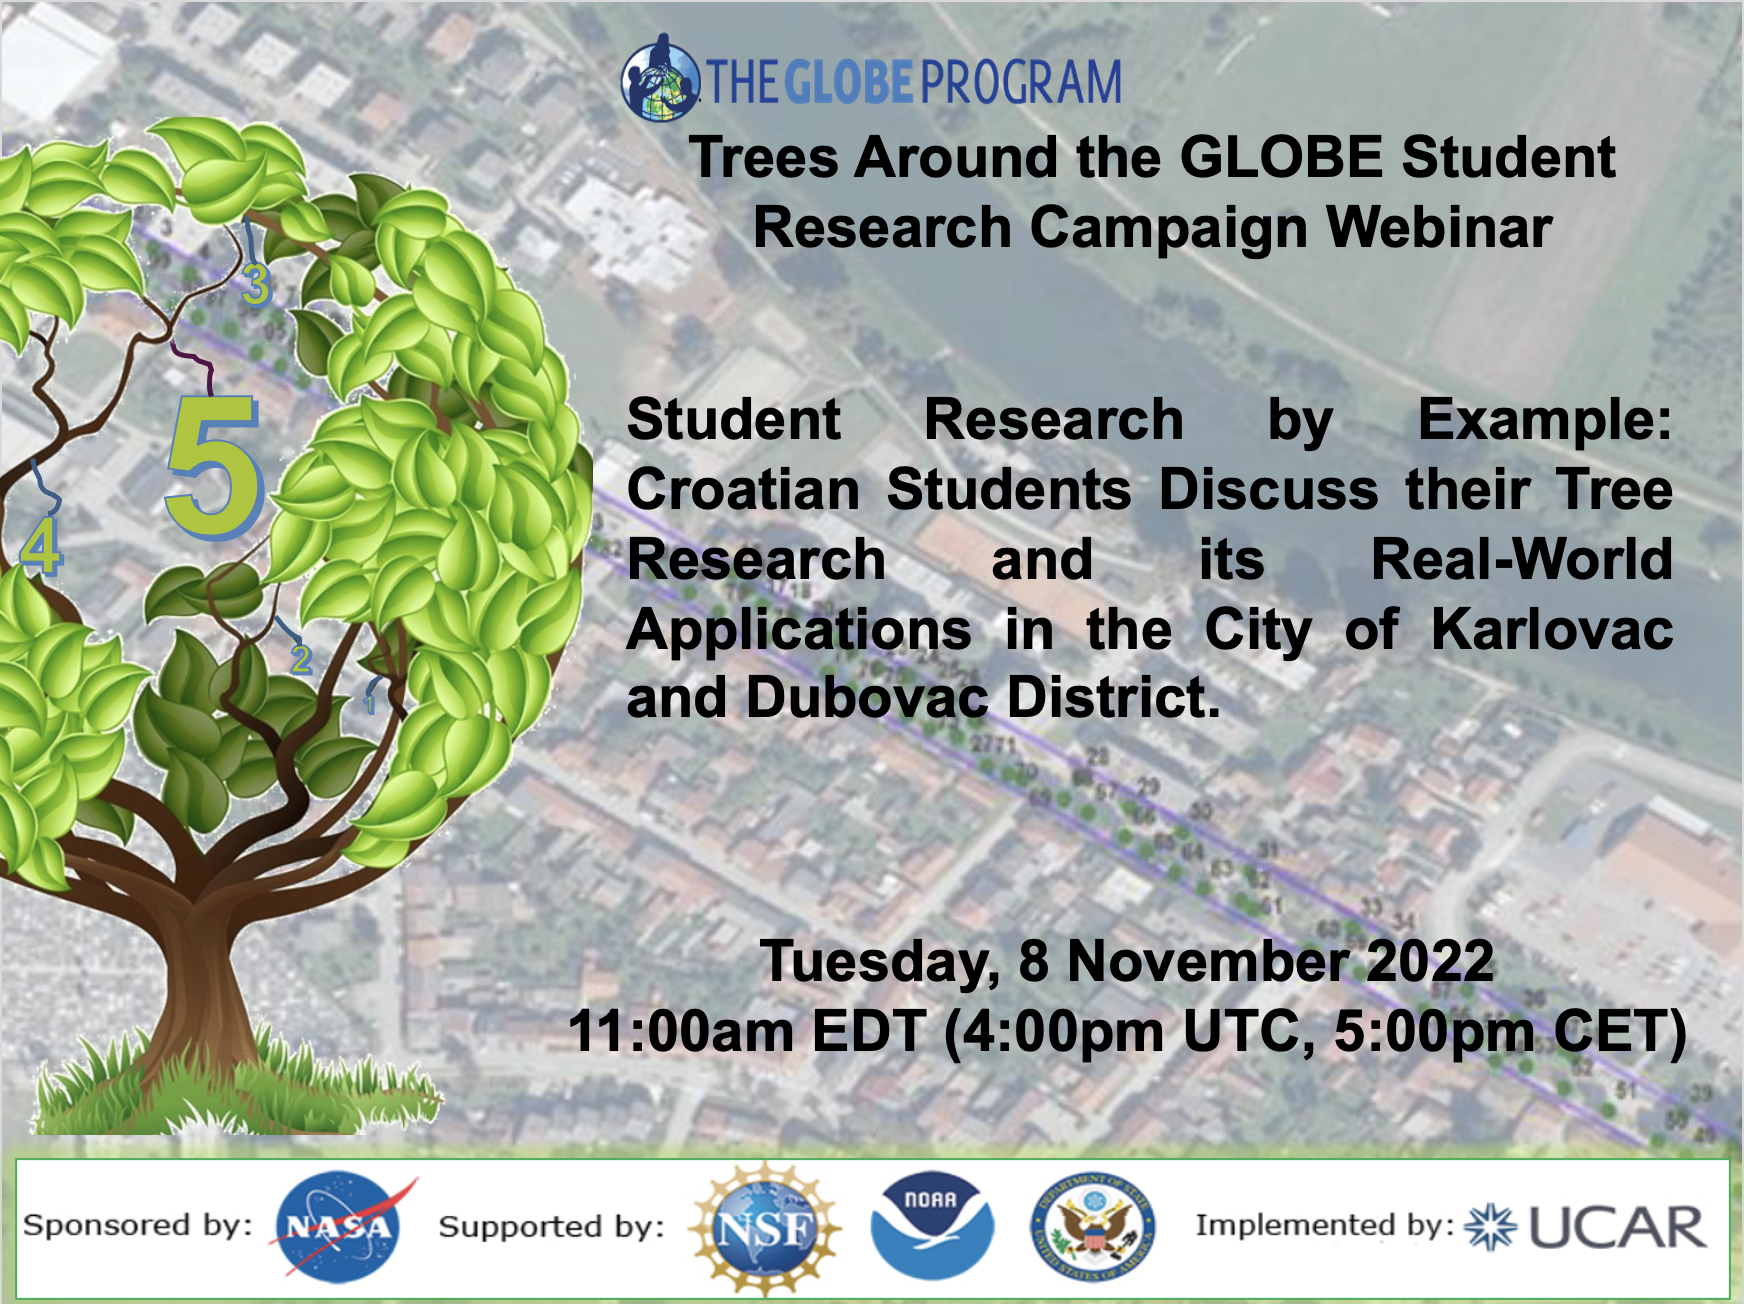 Trees Around the GLOBE 08 November webinar shareable, showing the title and date of the event